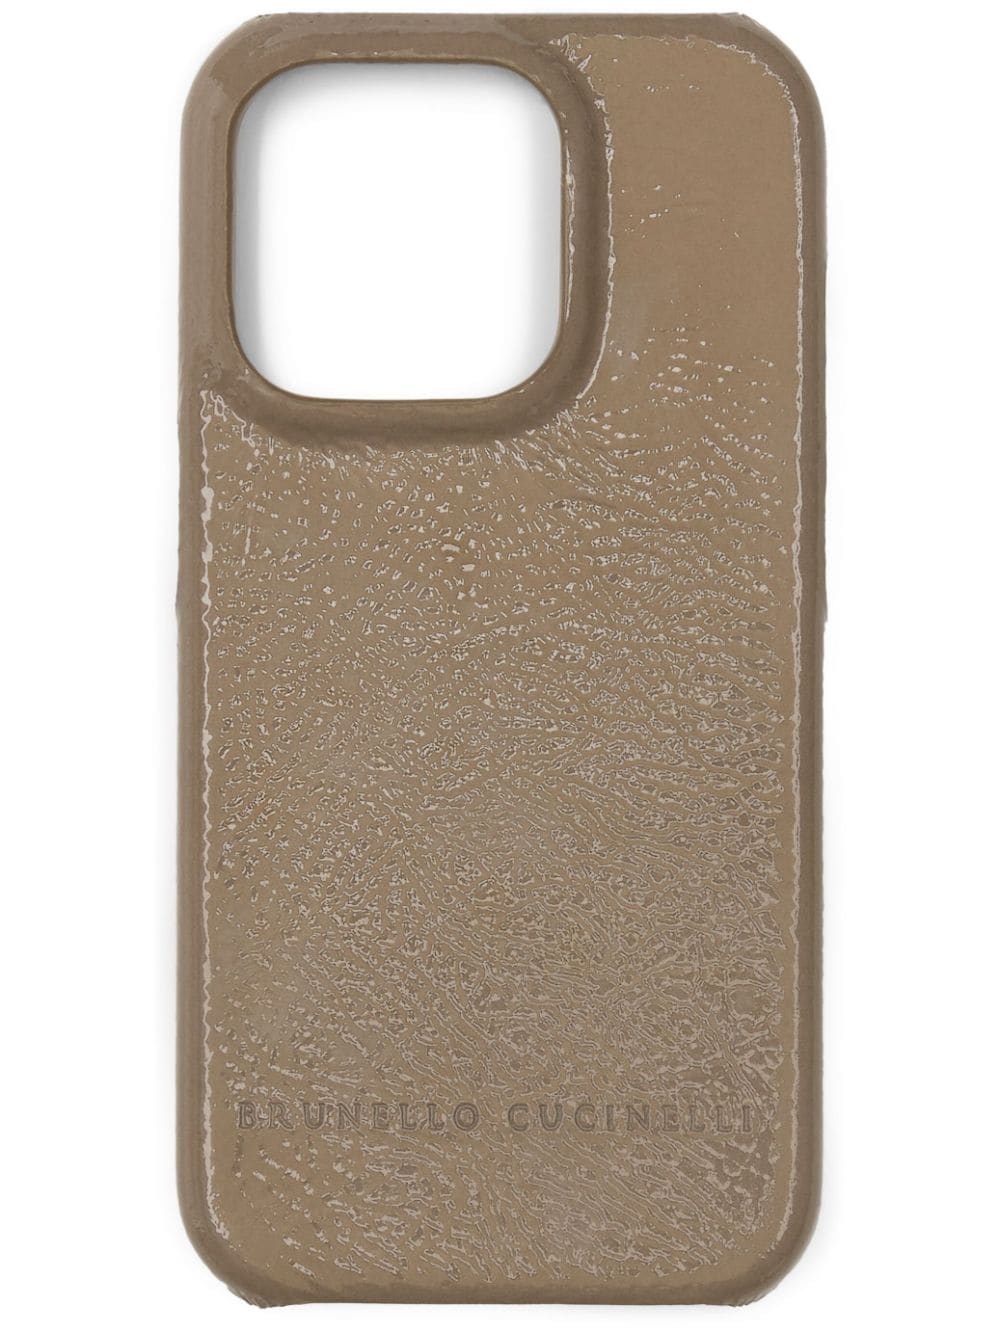 logo-debossed leather phone cover - 1